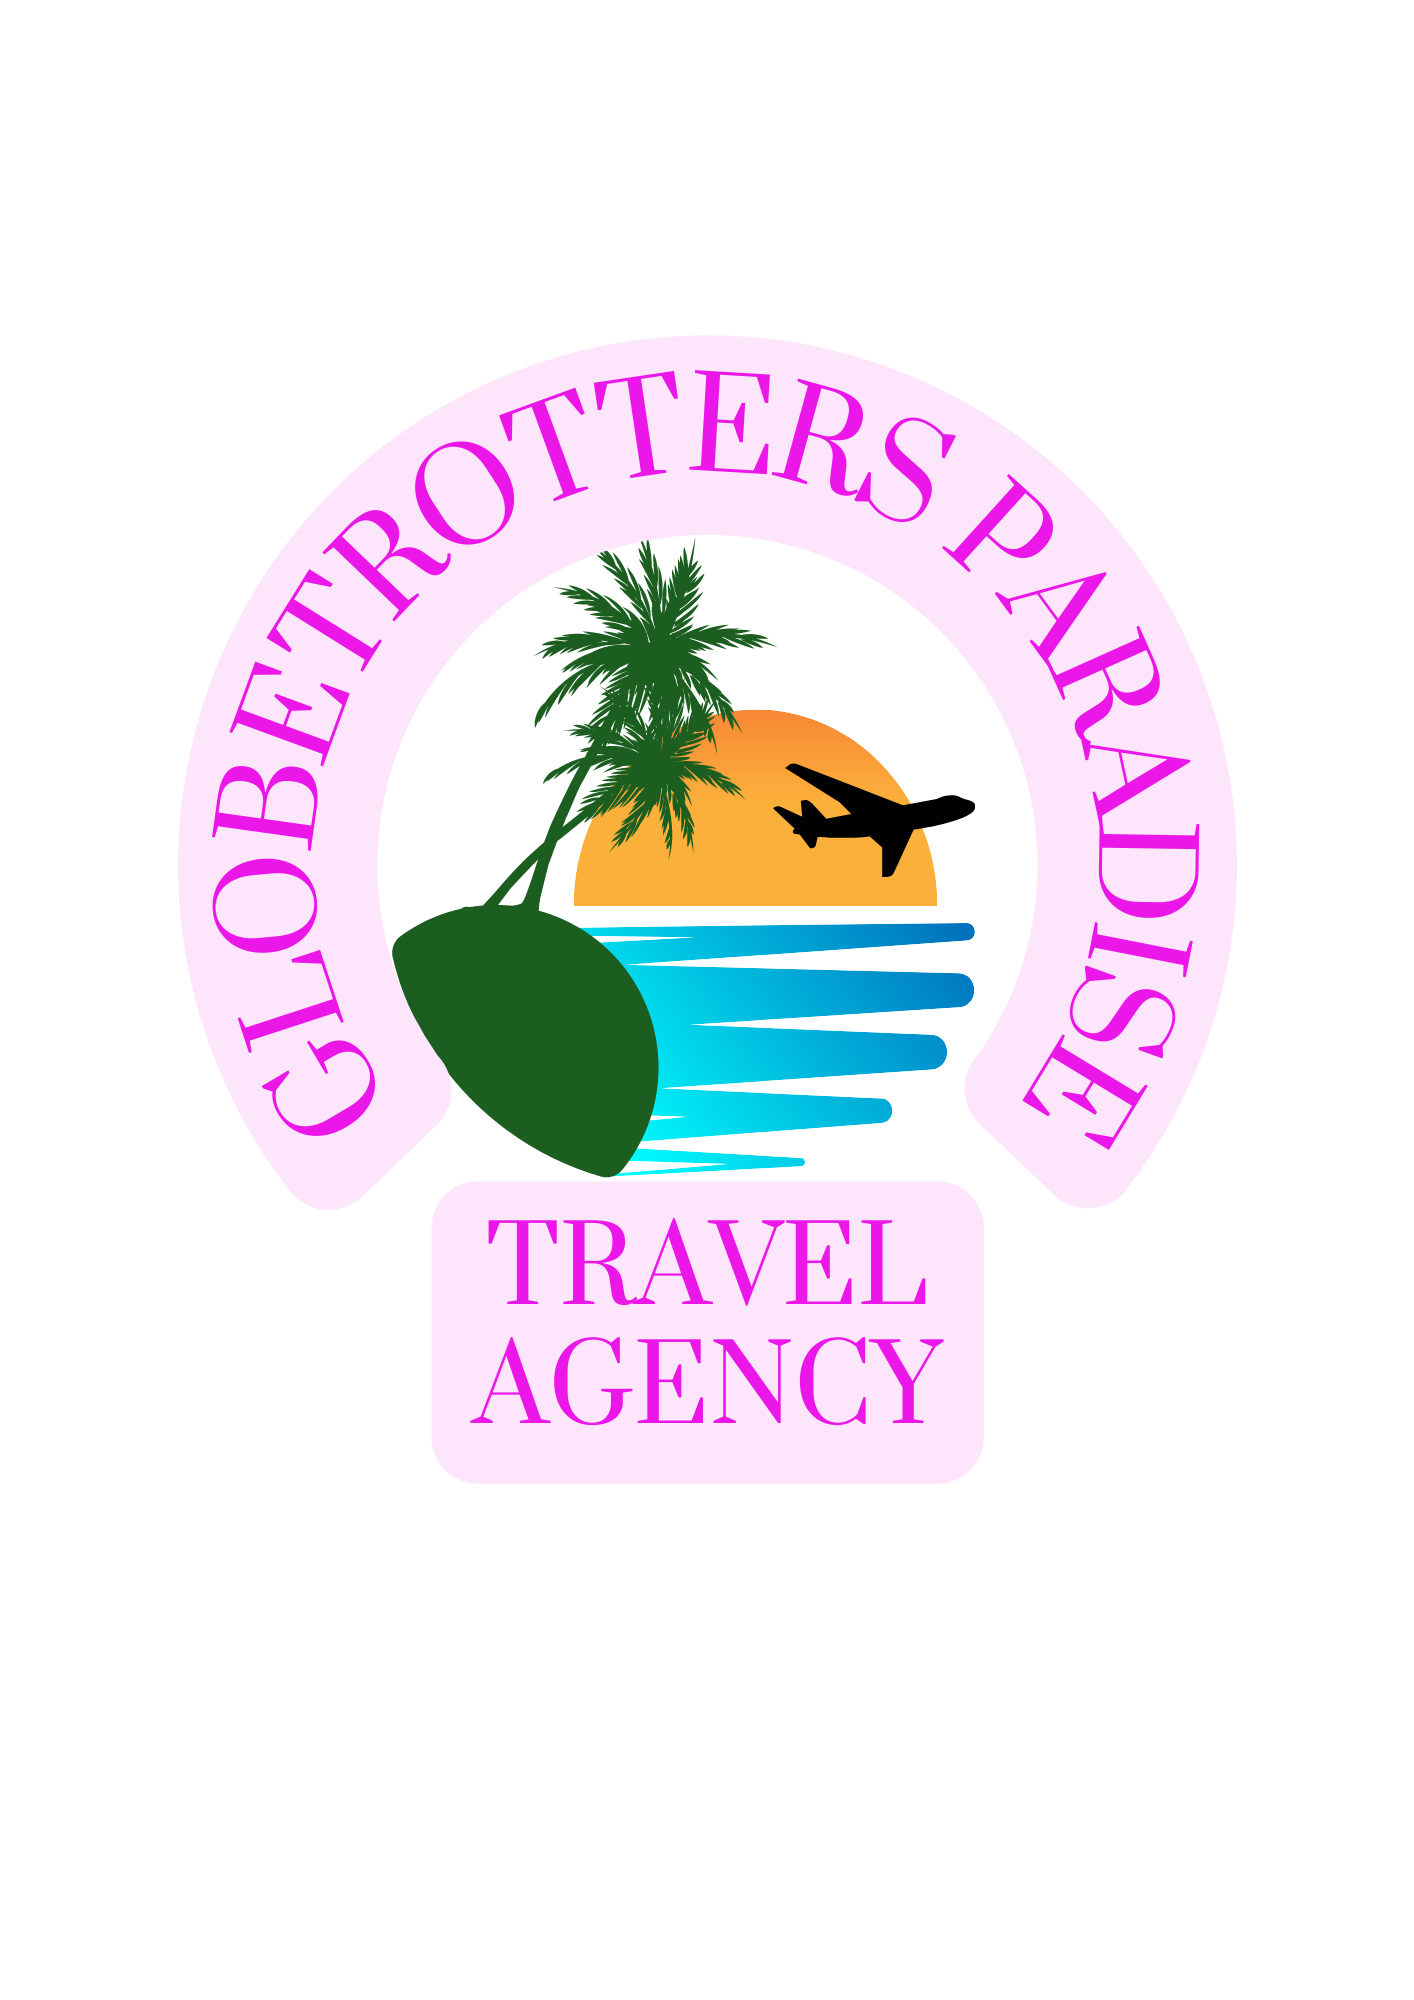 globetrotters travel agency